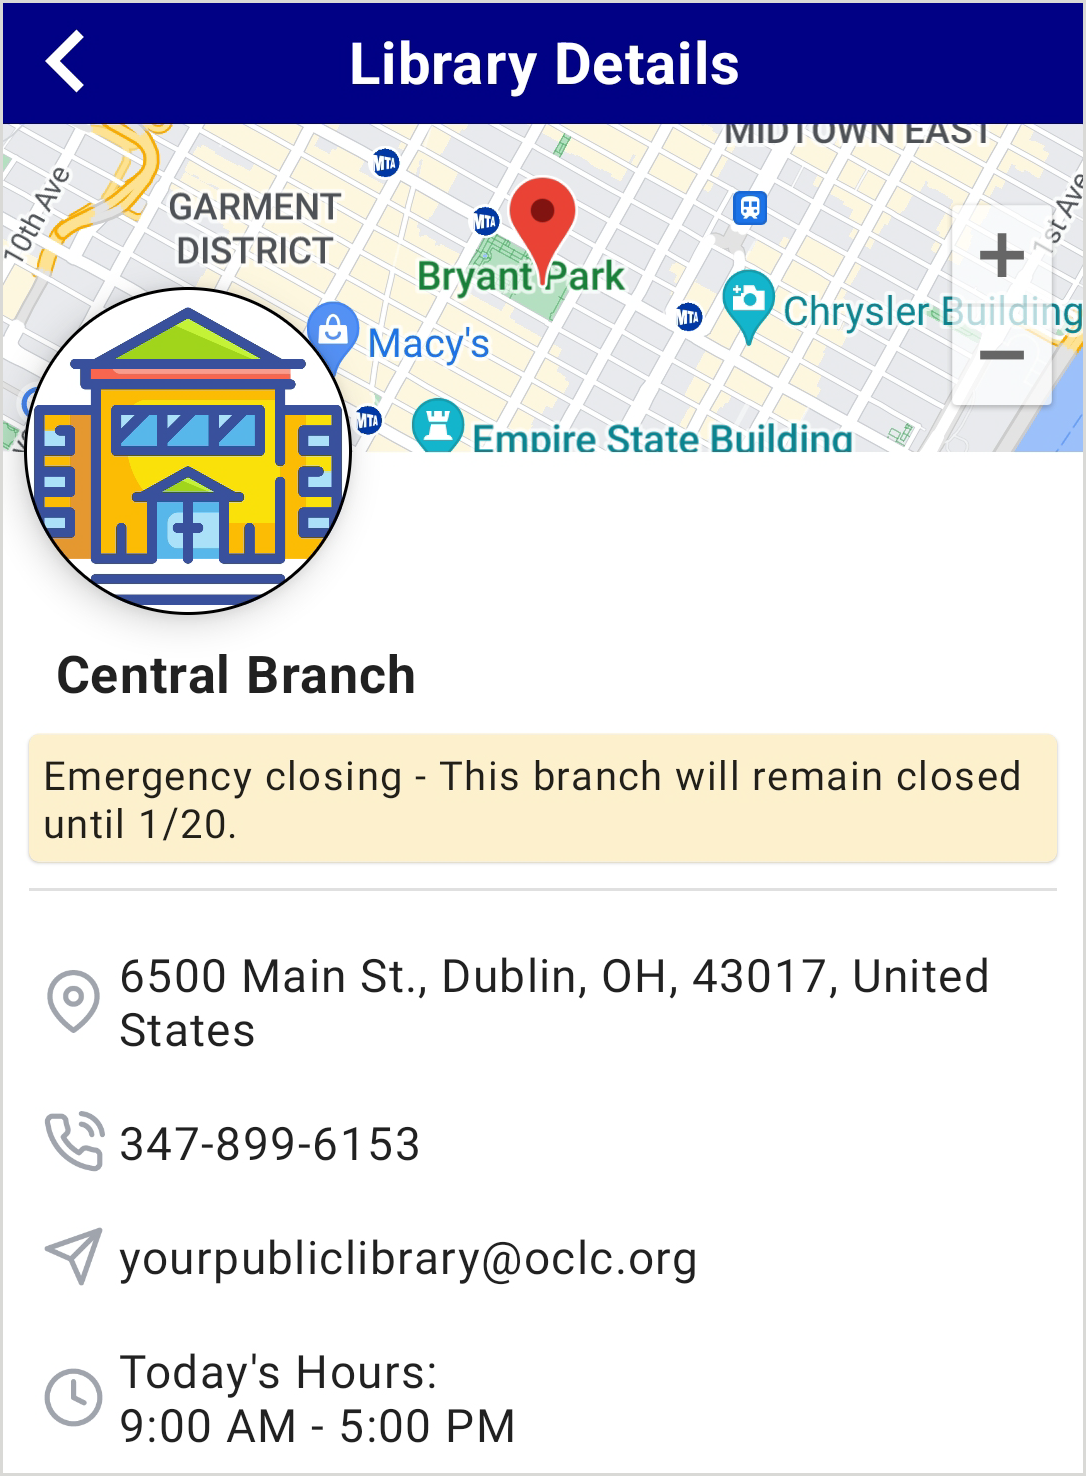 A Library Details page in the CapiraMobile app for Central Branch. Includes a map, emergency message, address, phone number, email and open hours